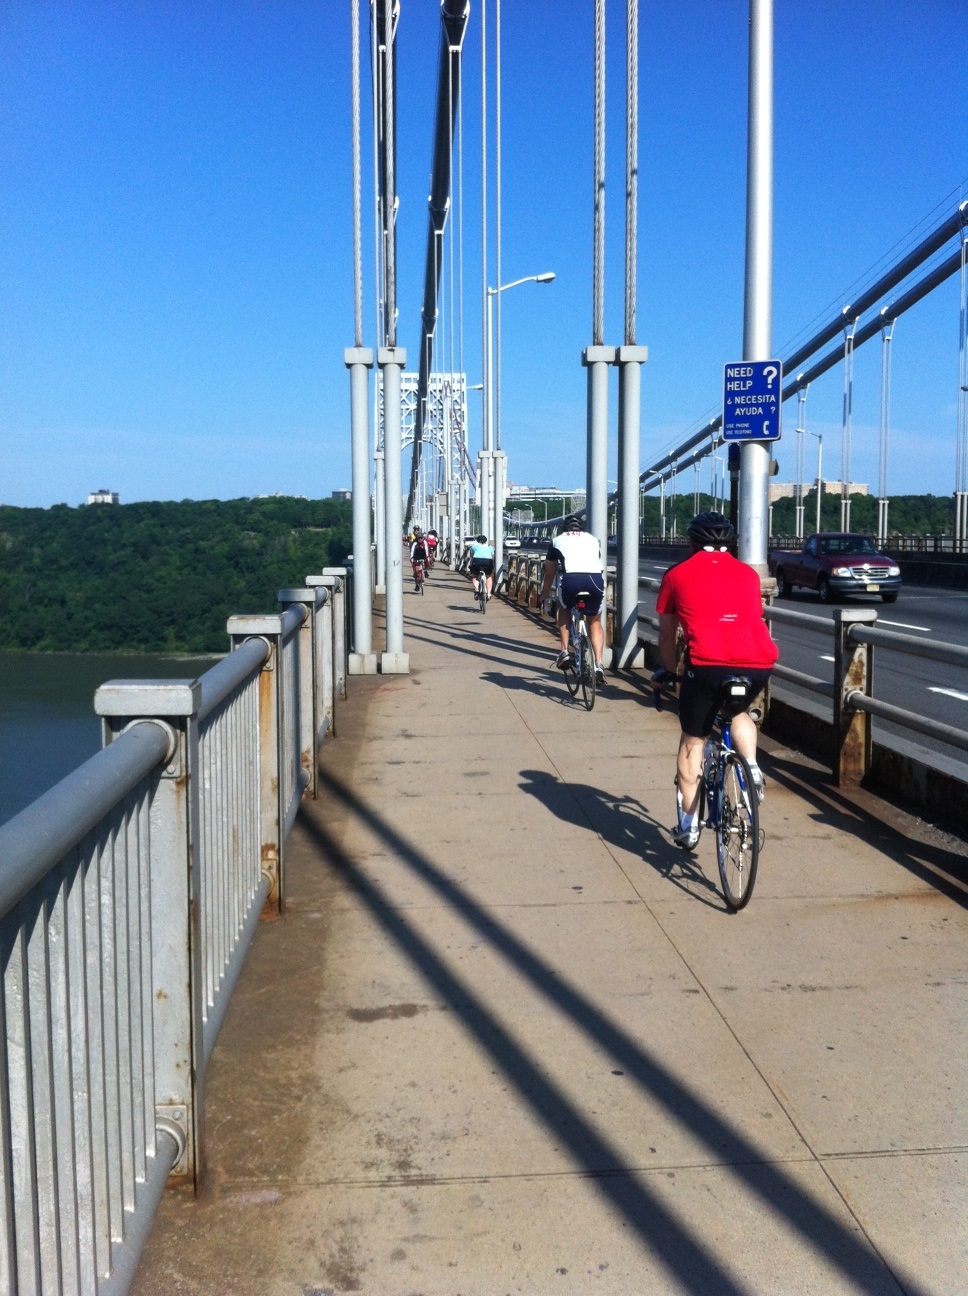 I stopped to take a picture of fellow cyclists as I ride across the George Washington Bridge leaving Manhatten.